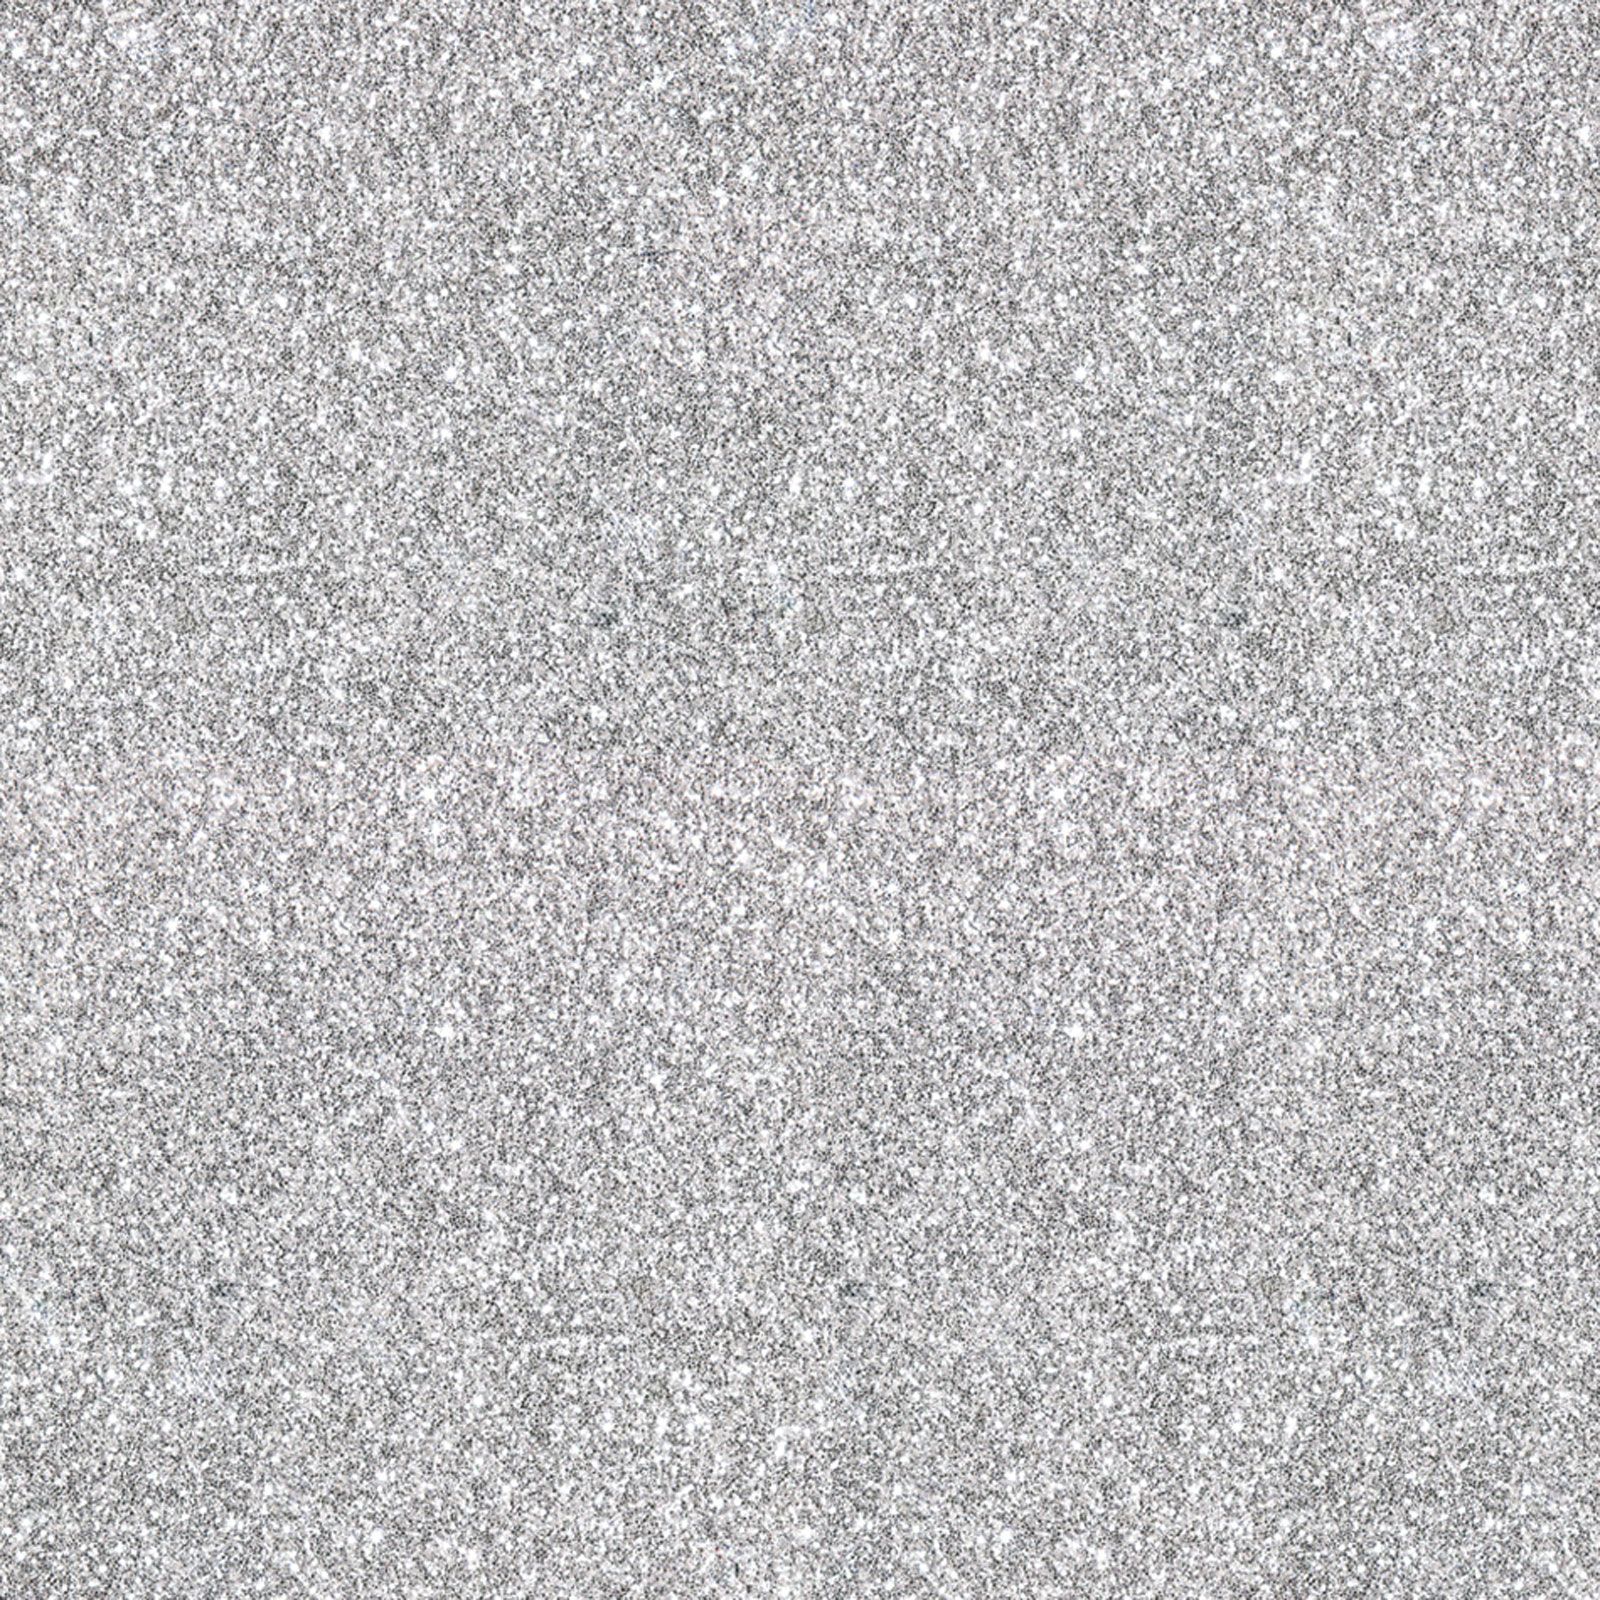 SPARKLE GLITTER WALLPAPER IDEAL FOR FEATURE WALLS   PINK GOLD 1600x1600